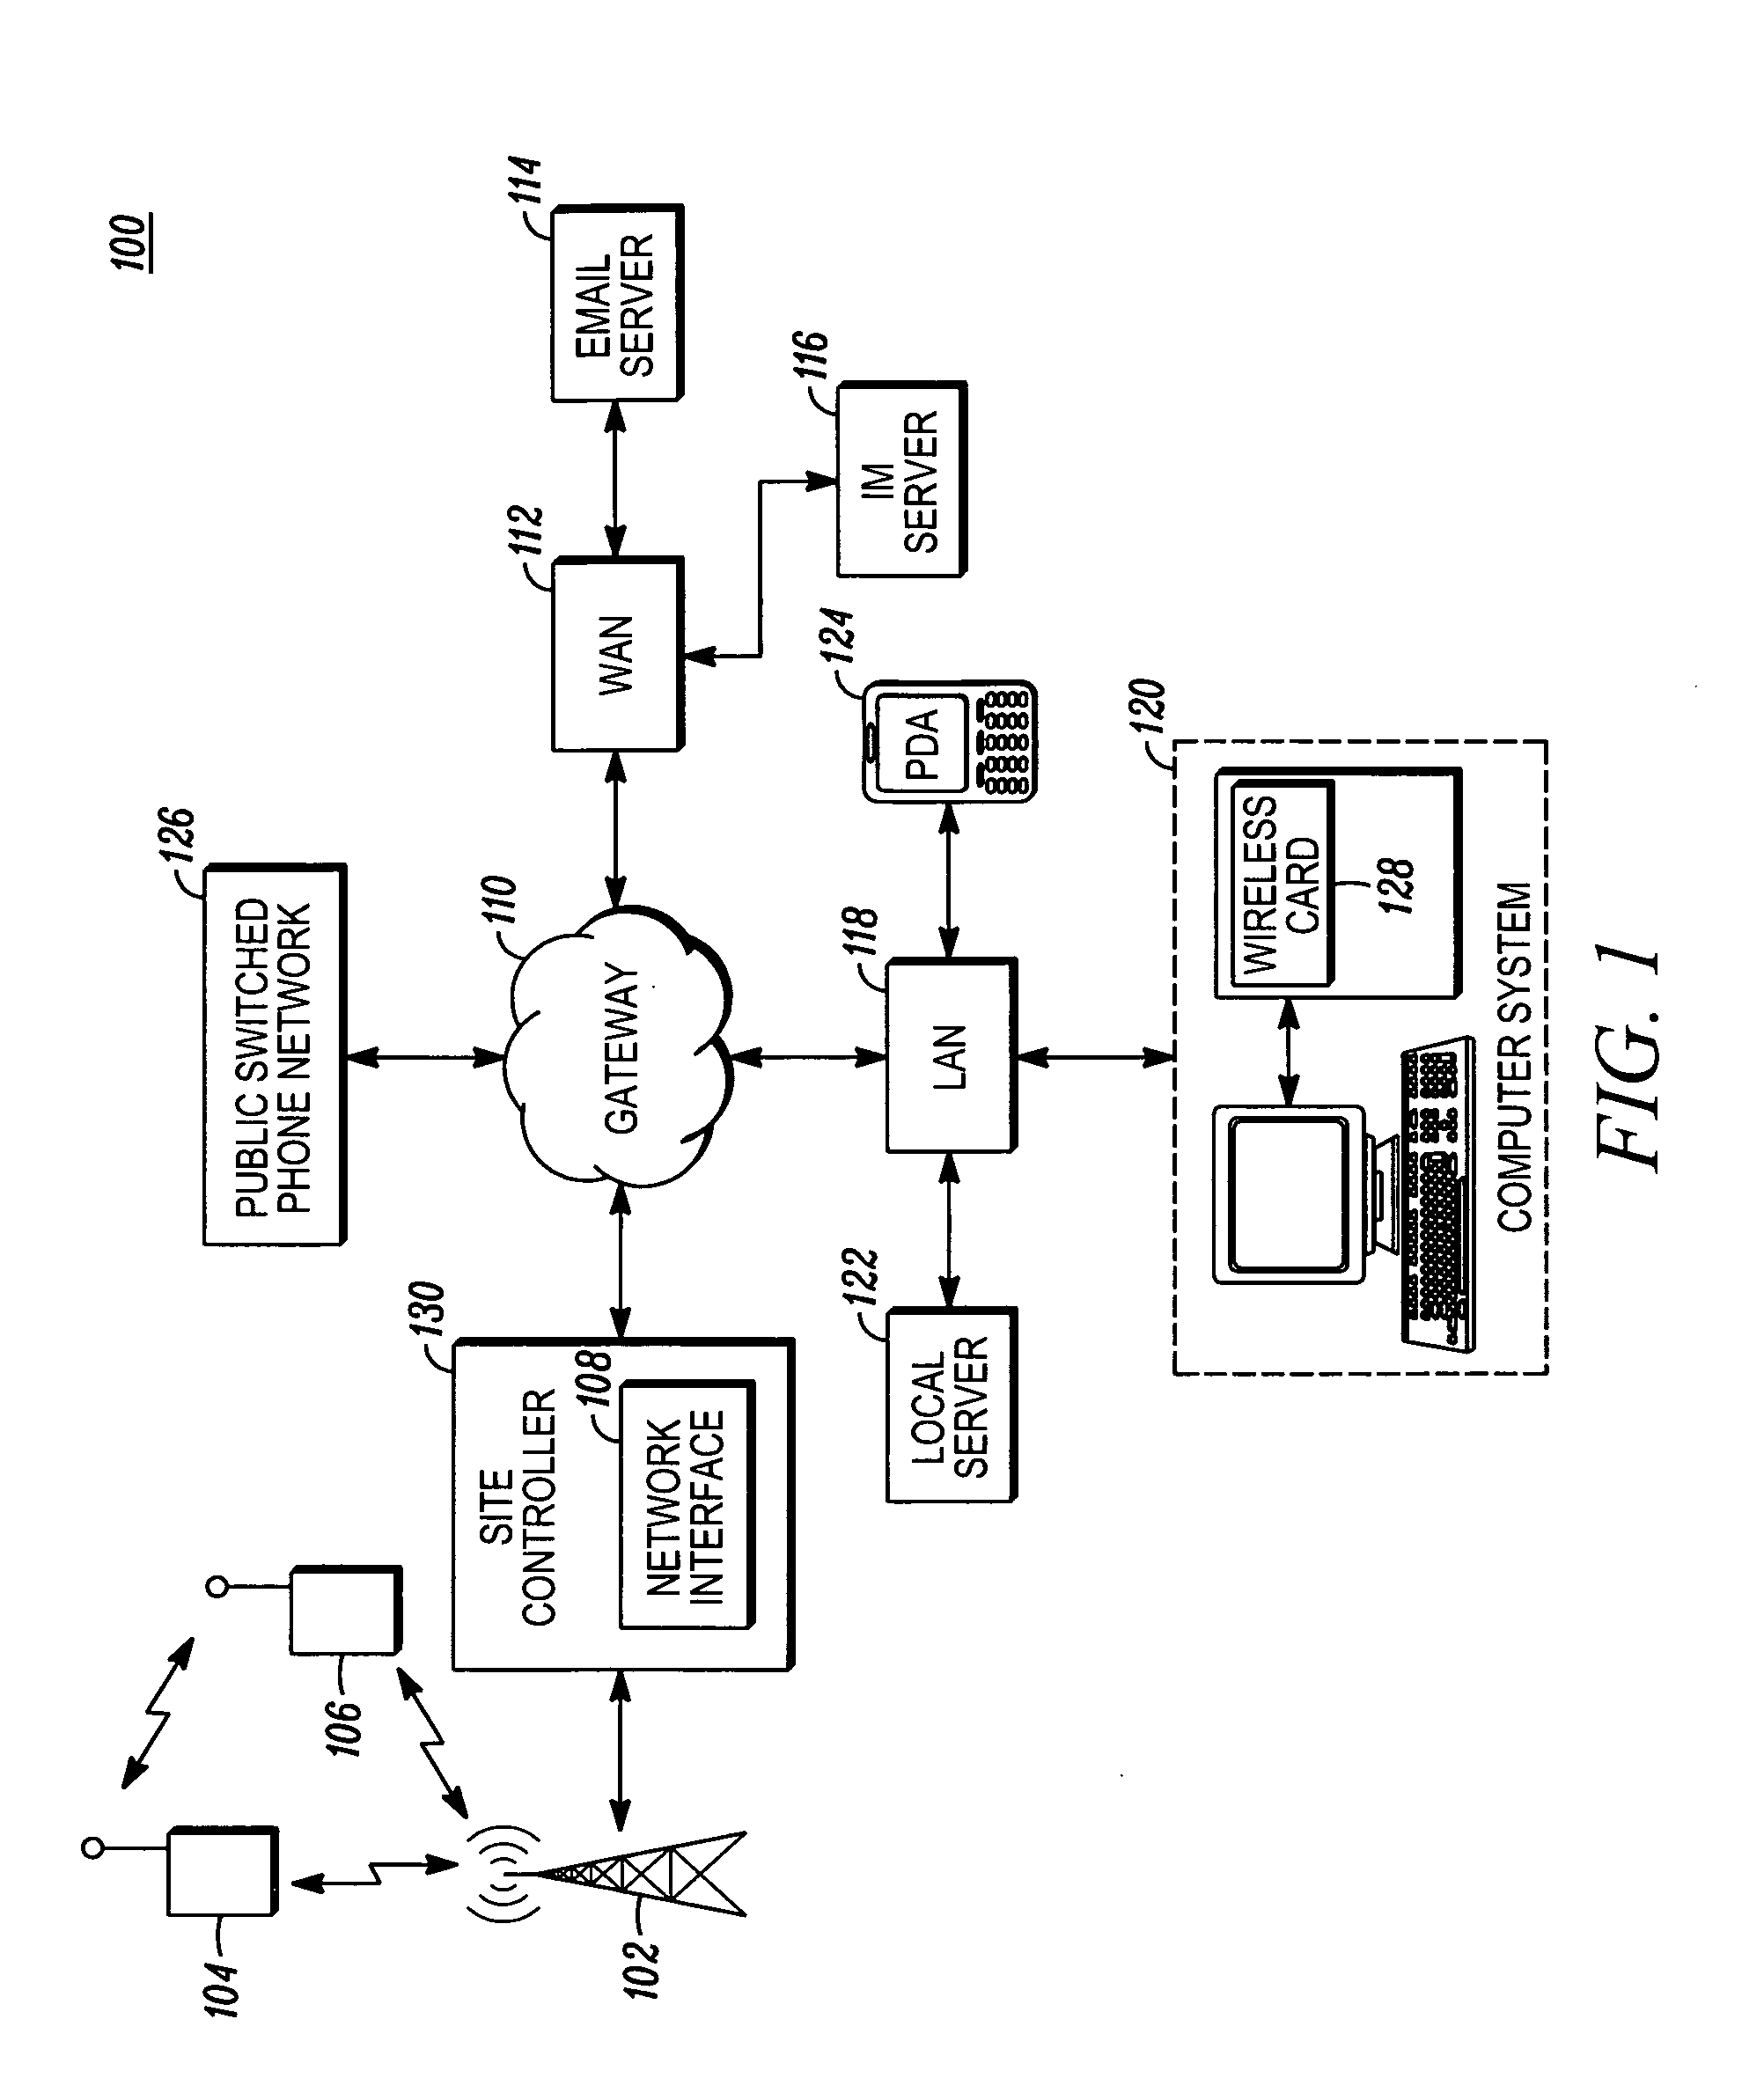 Method and apparatus for organizing a contact list by weighted service type for use by a communication device